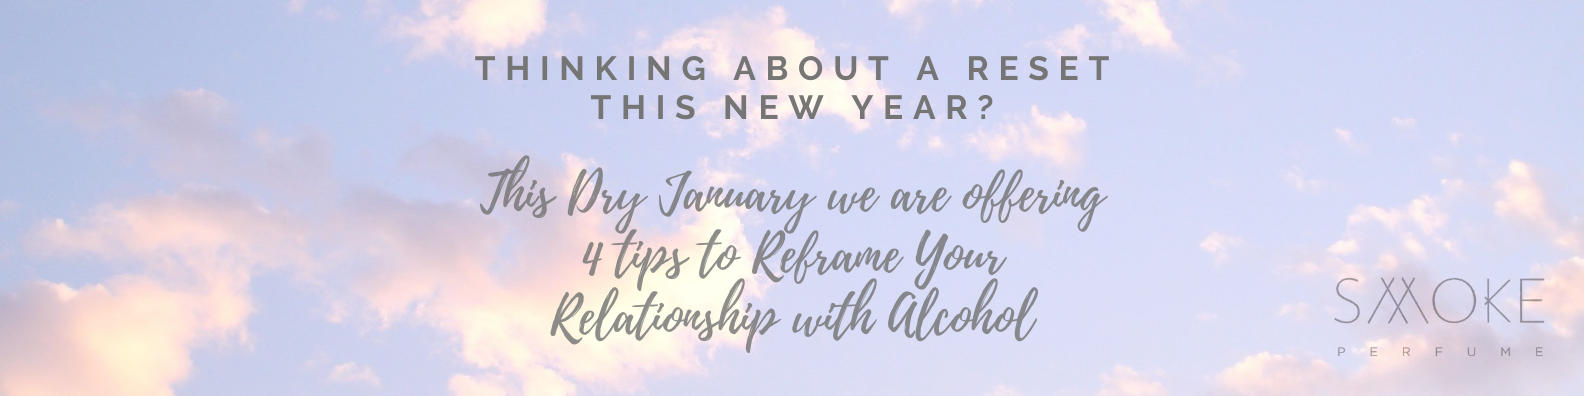 Thinking about a reset this New Year? This Dry January we are offering 4 tips to Reframe Your Relationship with Alcohol